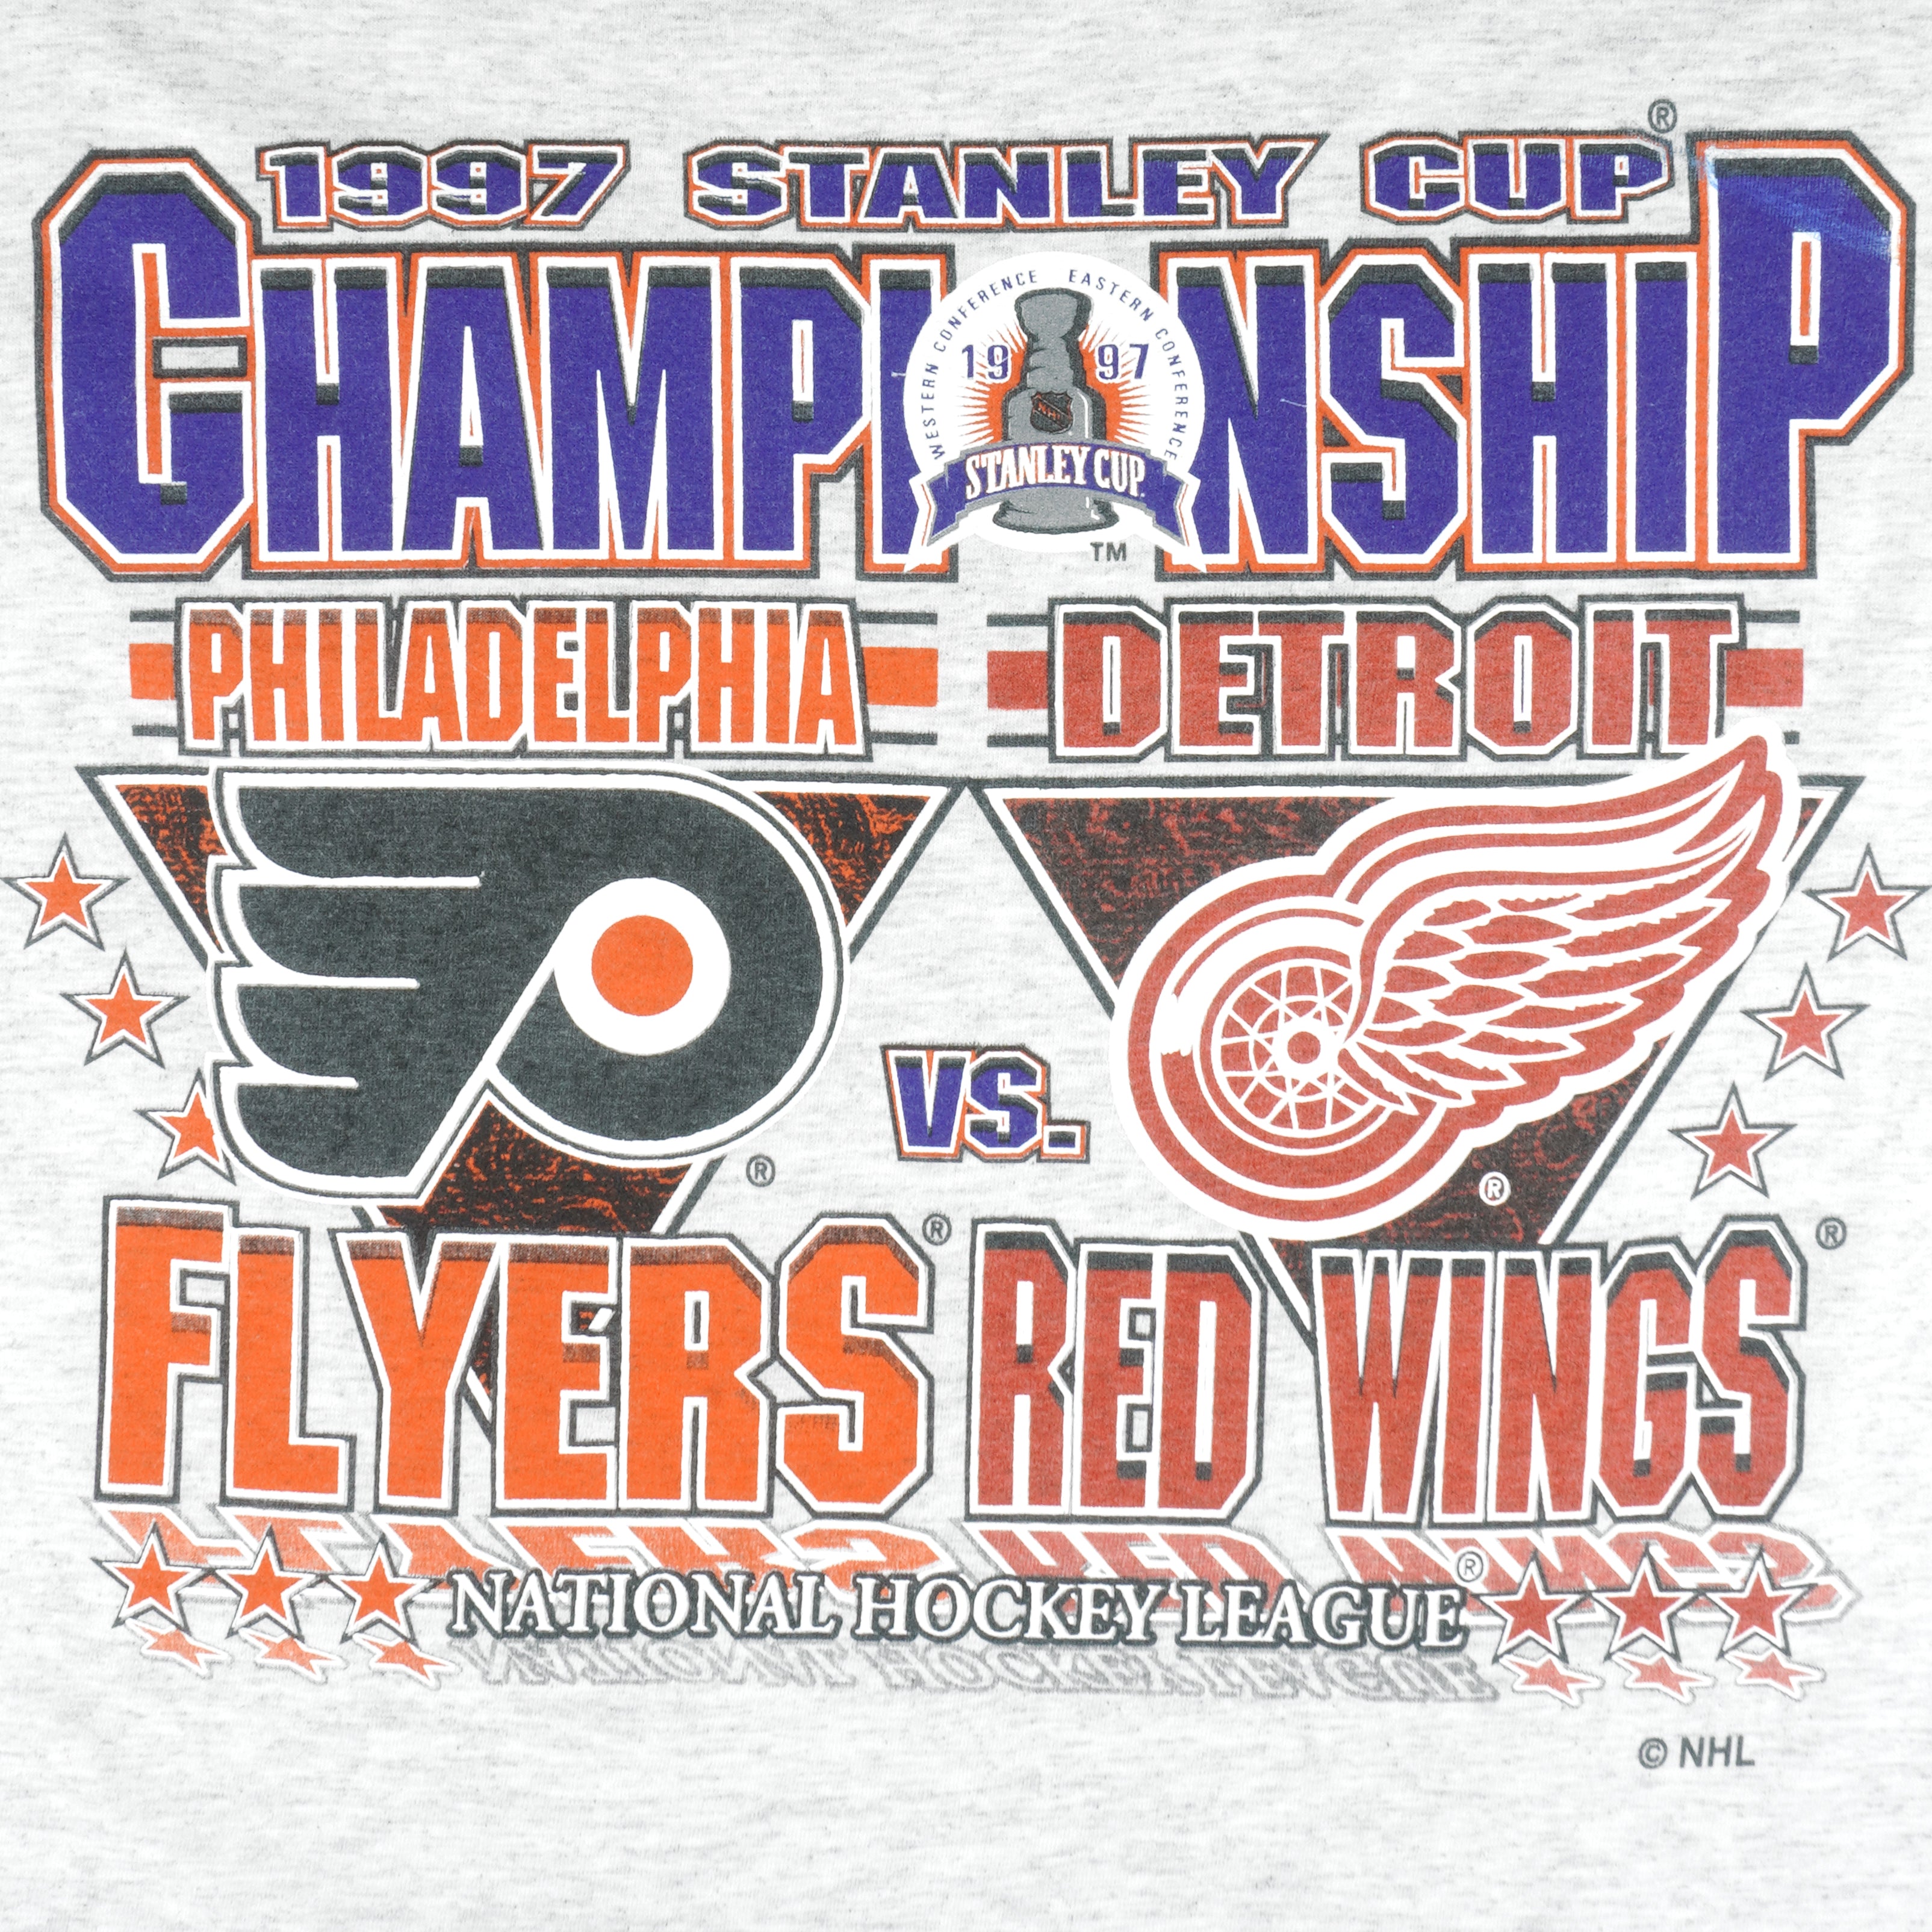 1997 Stanley Cup Final Game 4: Philadelphia Flyers at Detroit Red